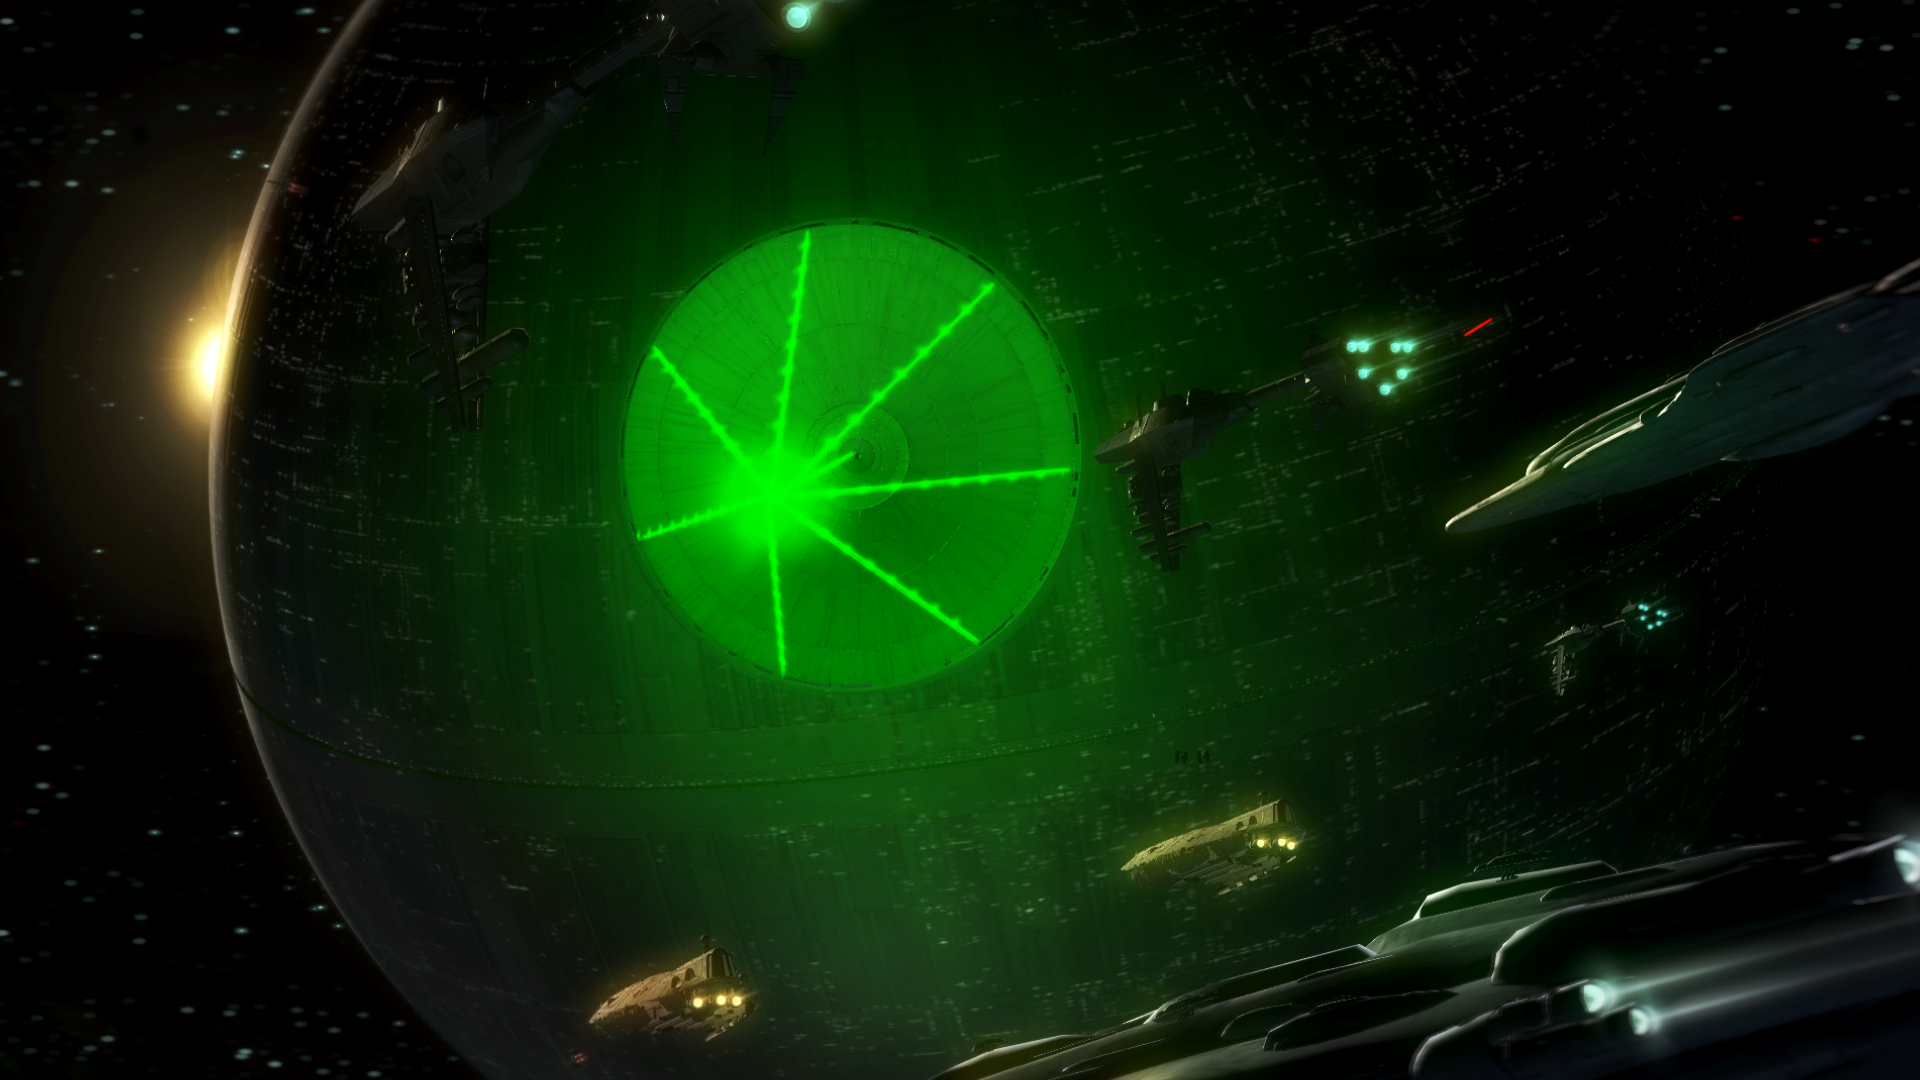 The planet-killing laser is fired up on the Death Star. Previs frame The Third Floor, Inc. © Lucasfilm Ltd. All Rights Reserved.